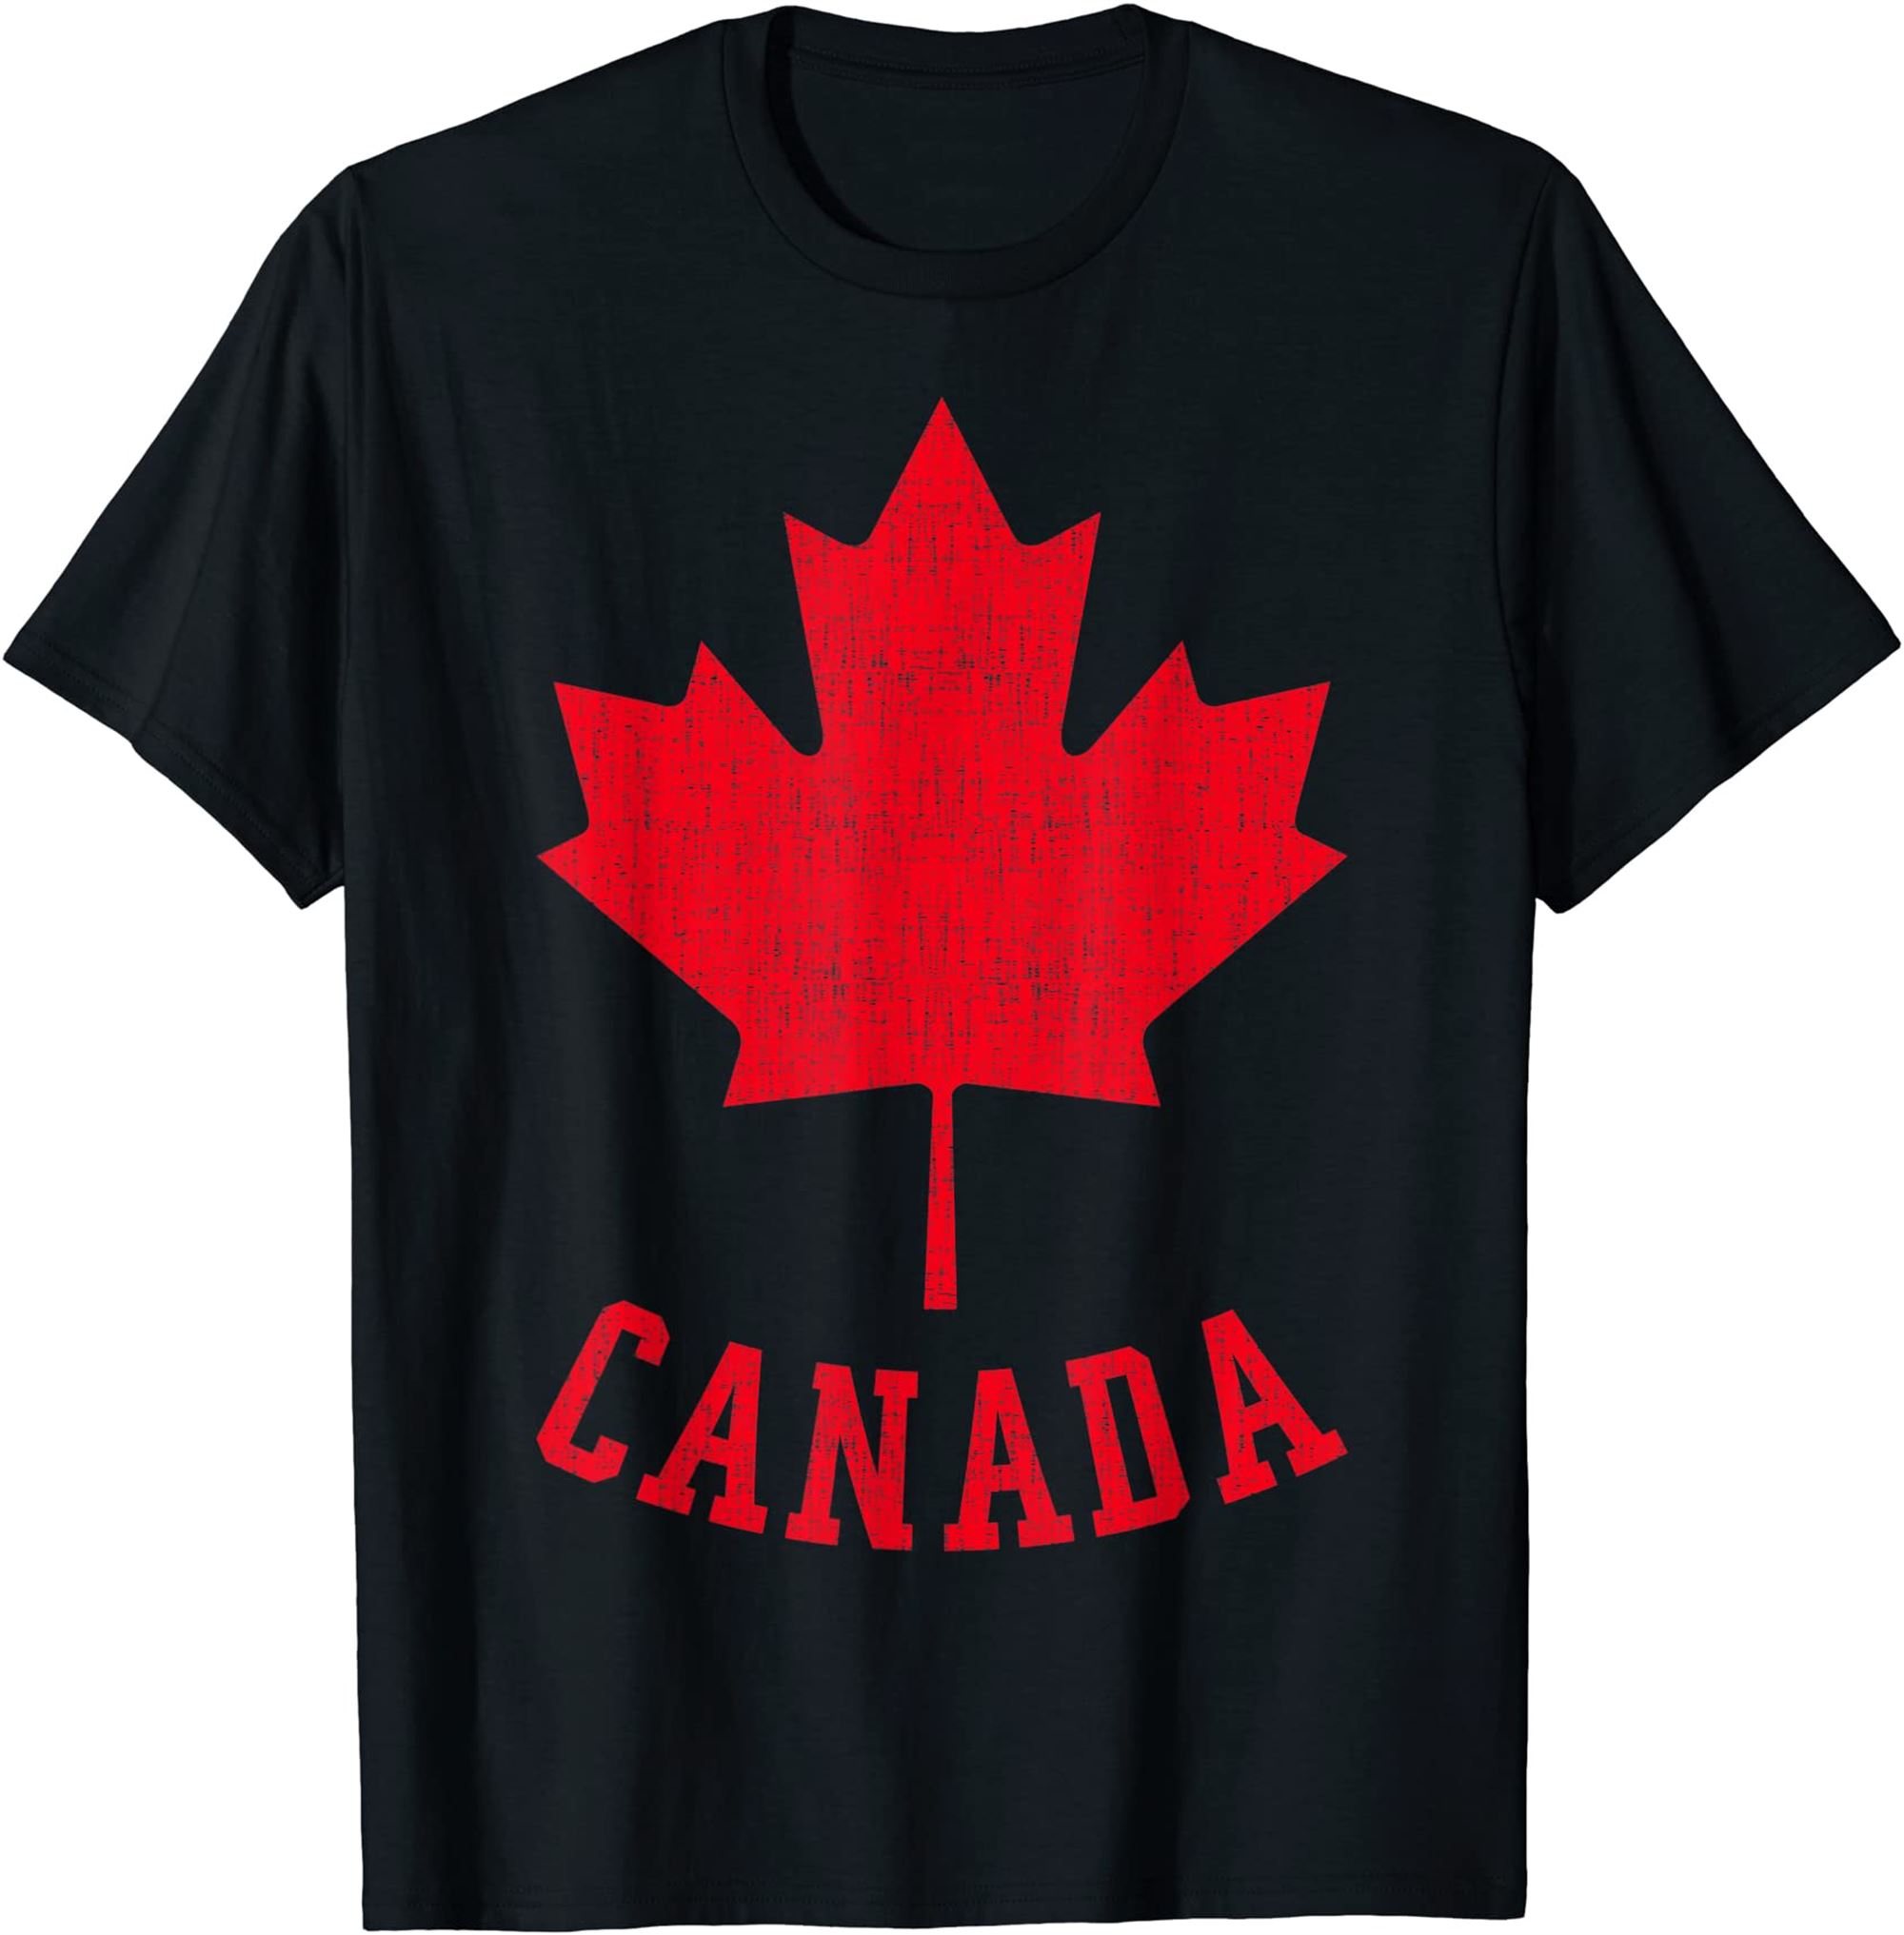 Canadian Flag Shirt Canada Independece Maple Leaf Men Women T-shirt Size Up To 5xl